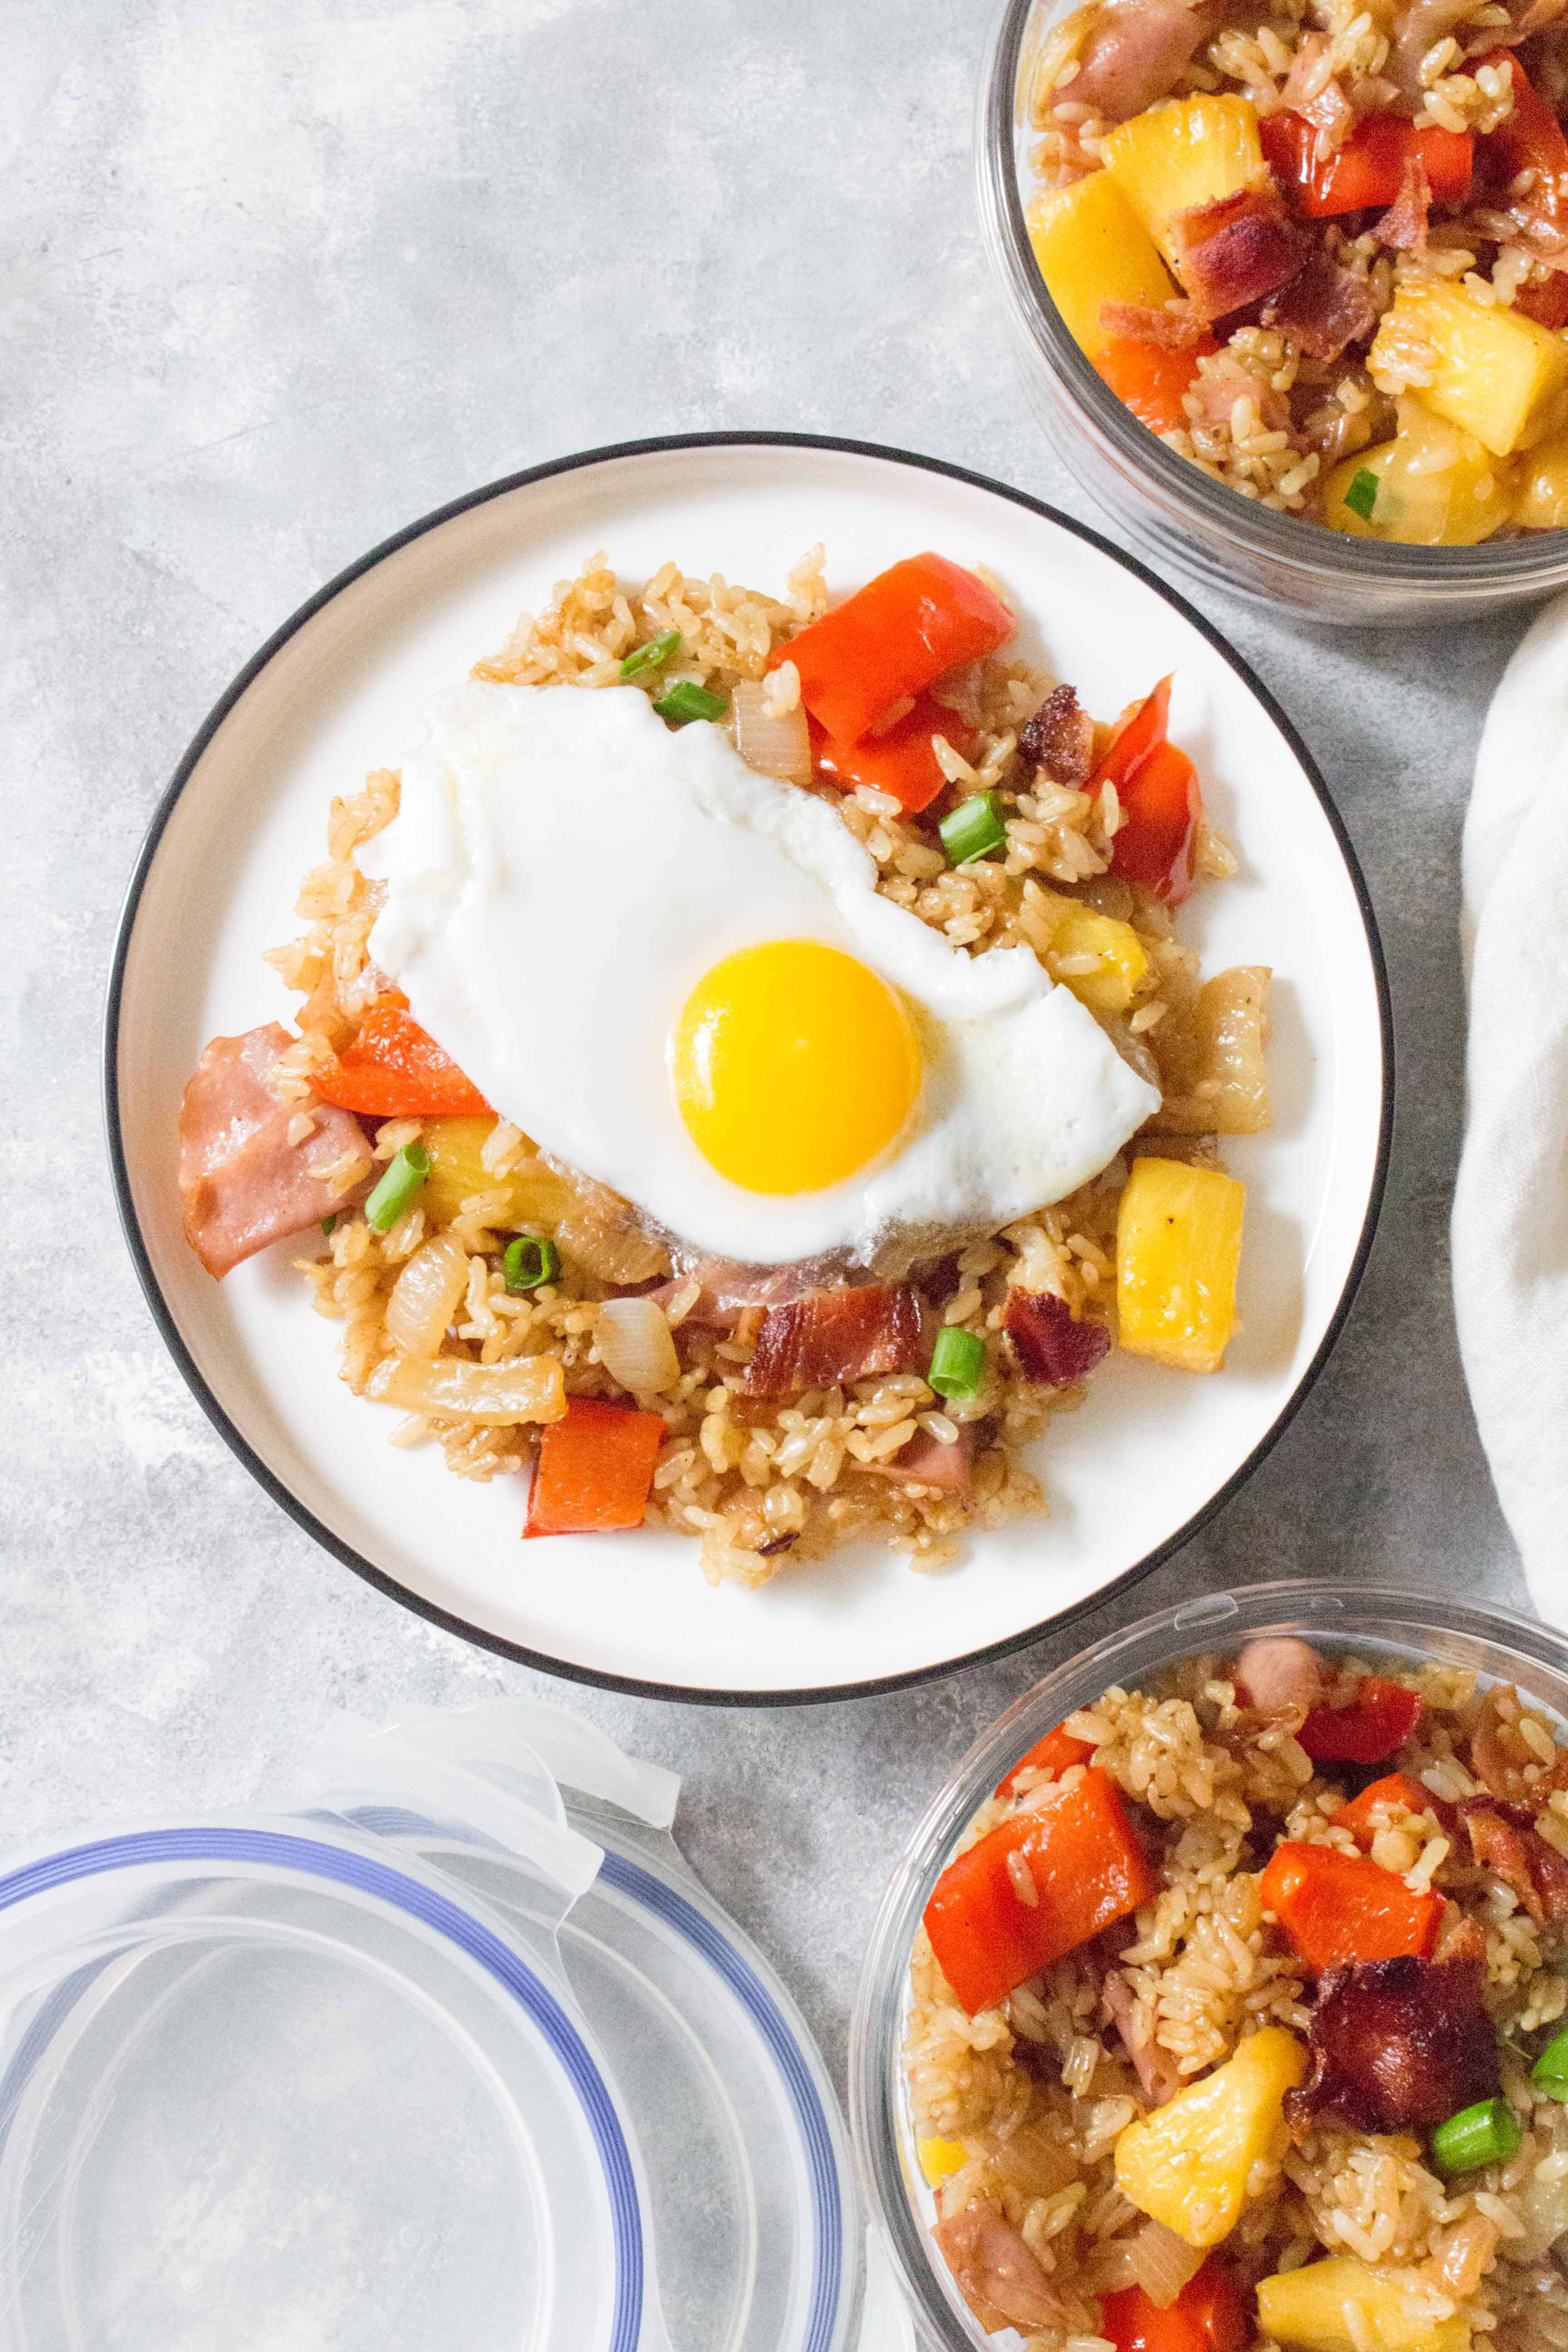 Made with easy to find ingredients, this Hawaiian Breakfast Fried Rice makes for a delicious morning!